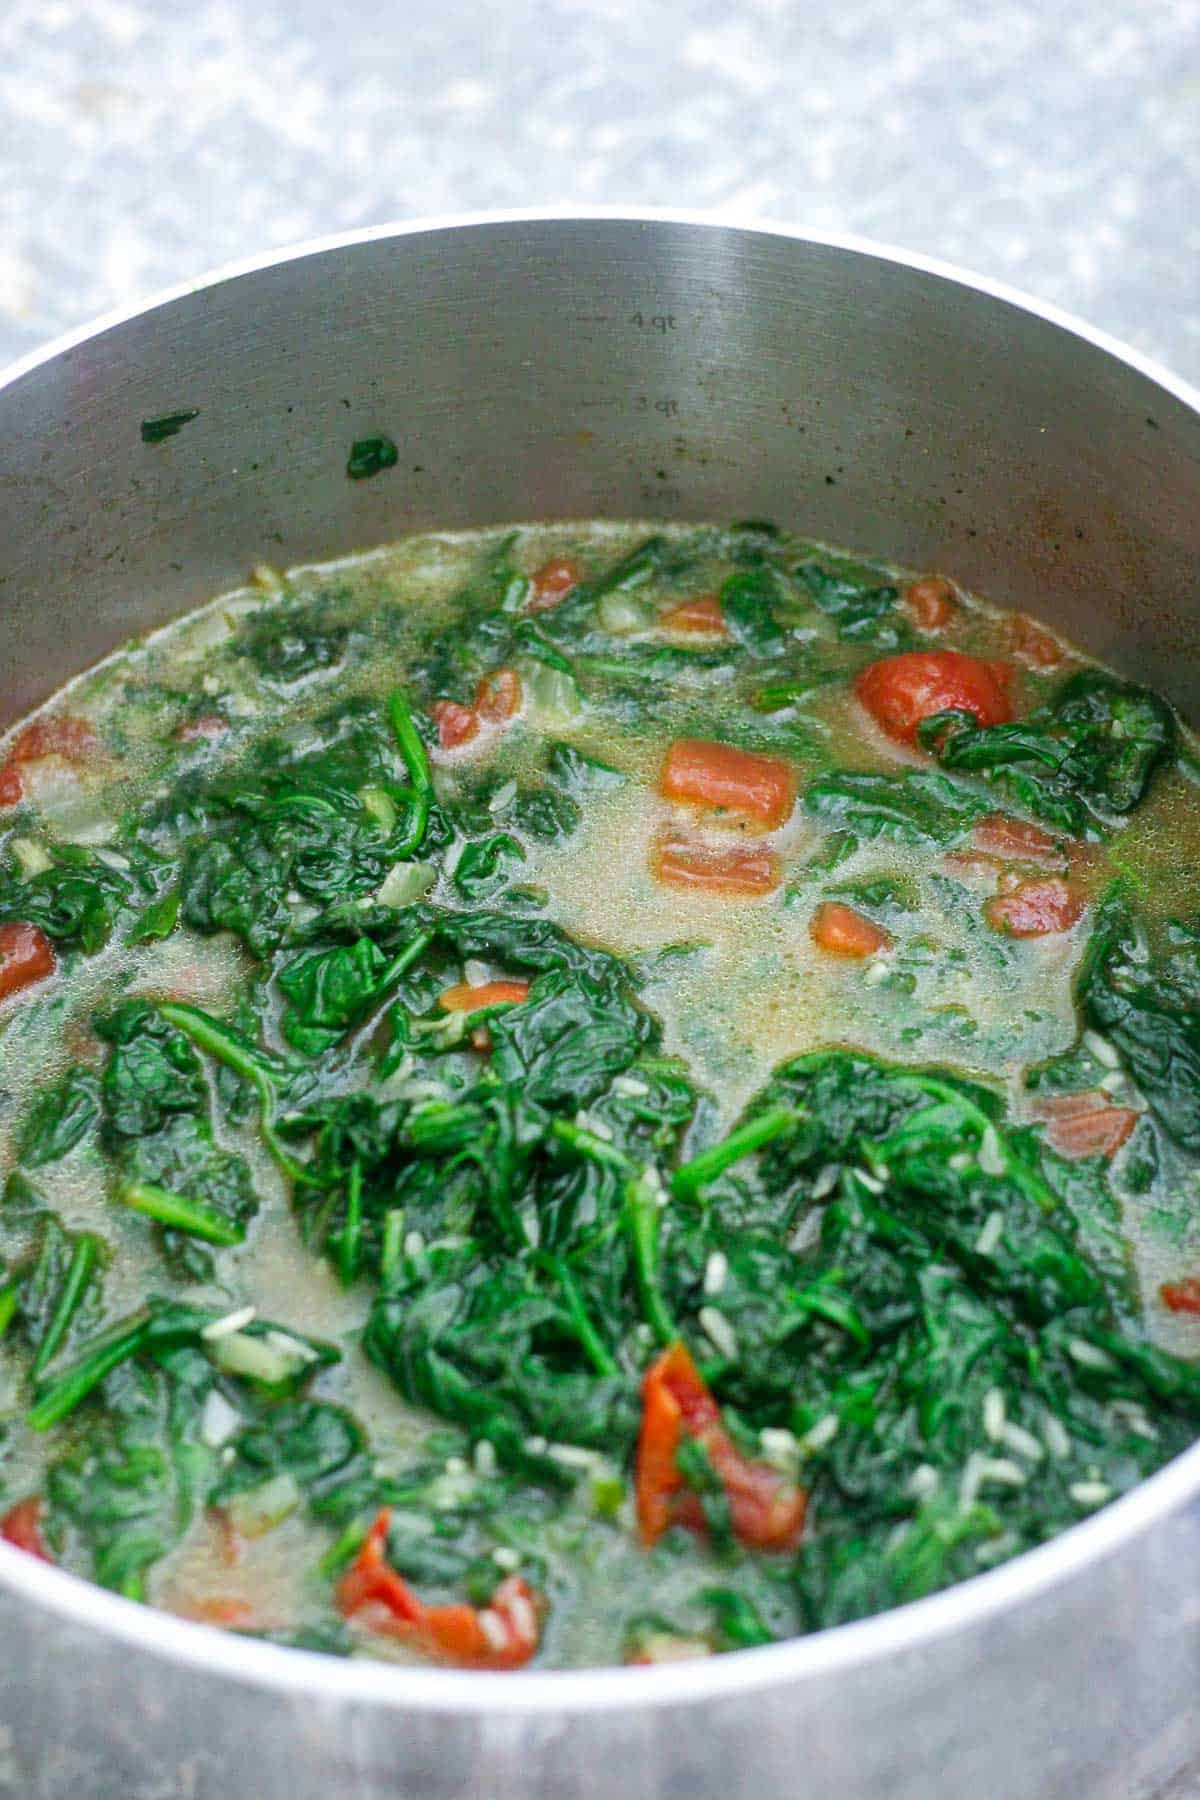 Spinach and rice cooking in the pot, you can see the tomatoes and liquid around the ingredients.